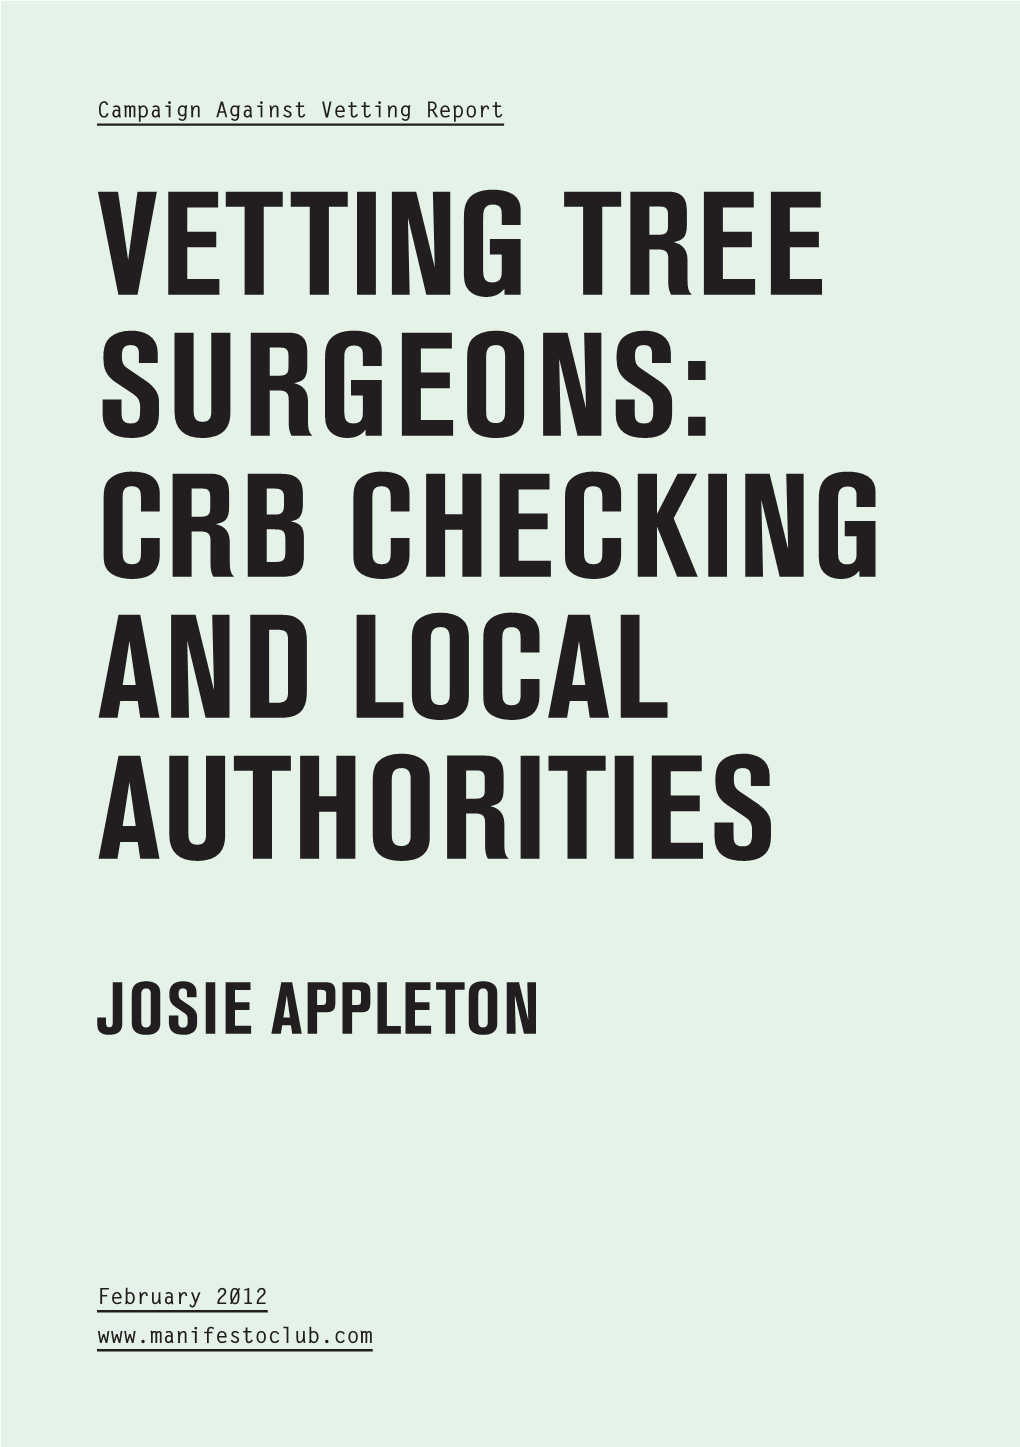 Vetting Tree Surgeons: CRB Checking and Local Authorities